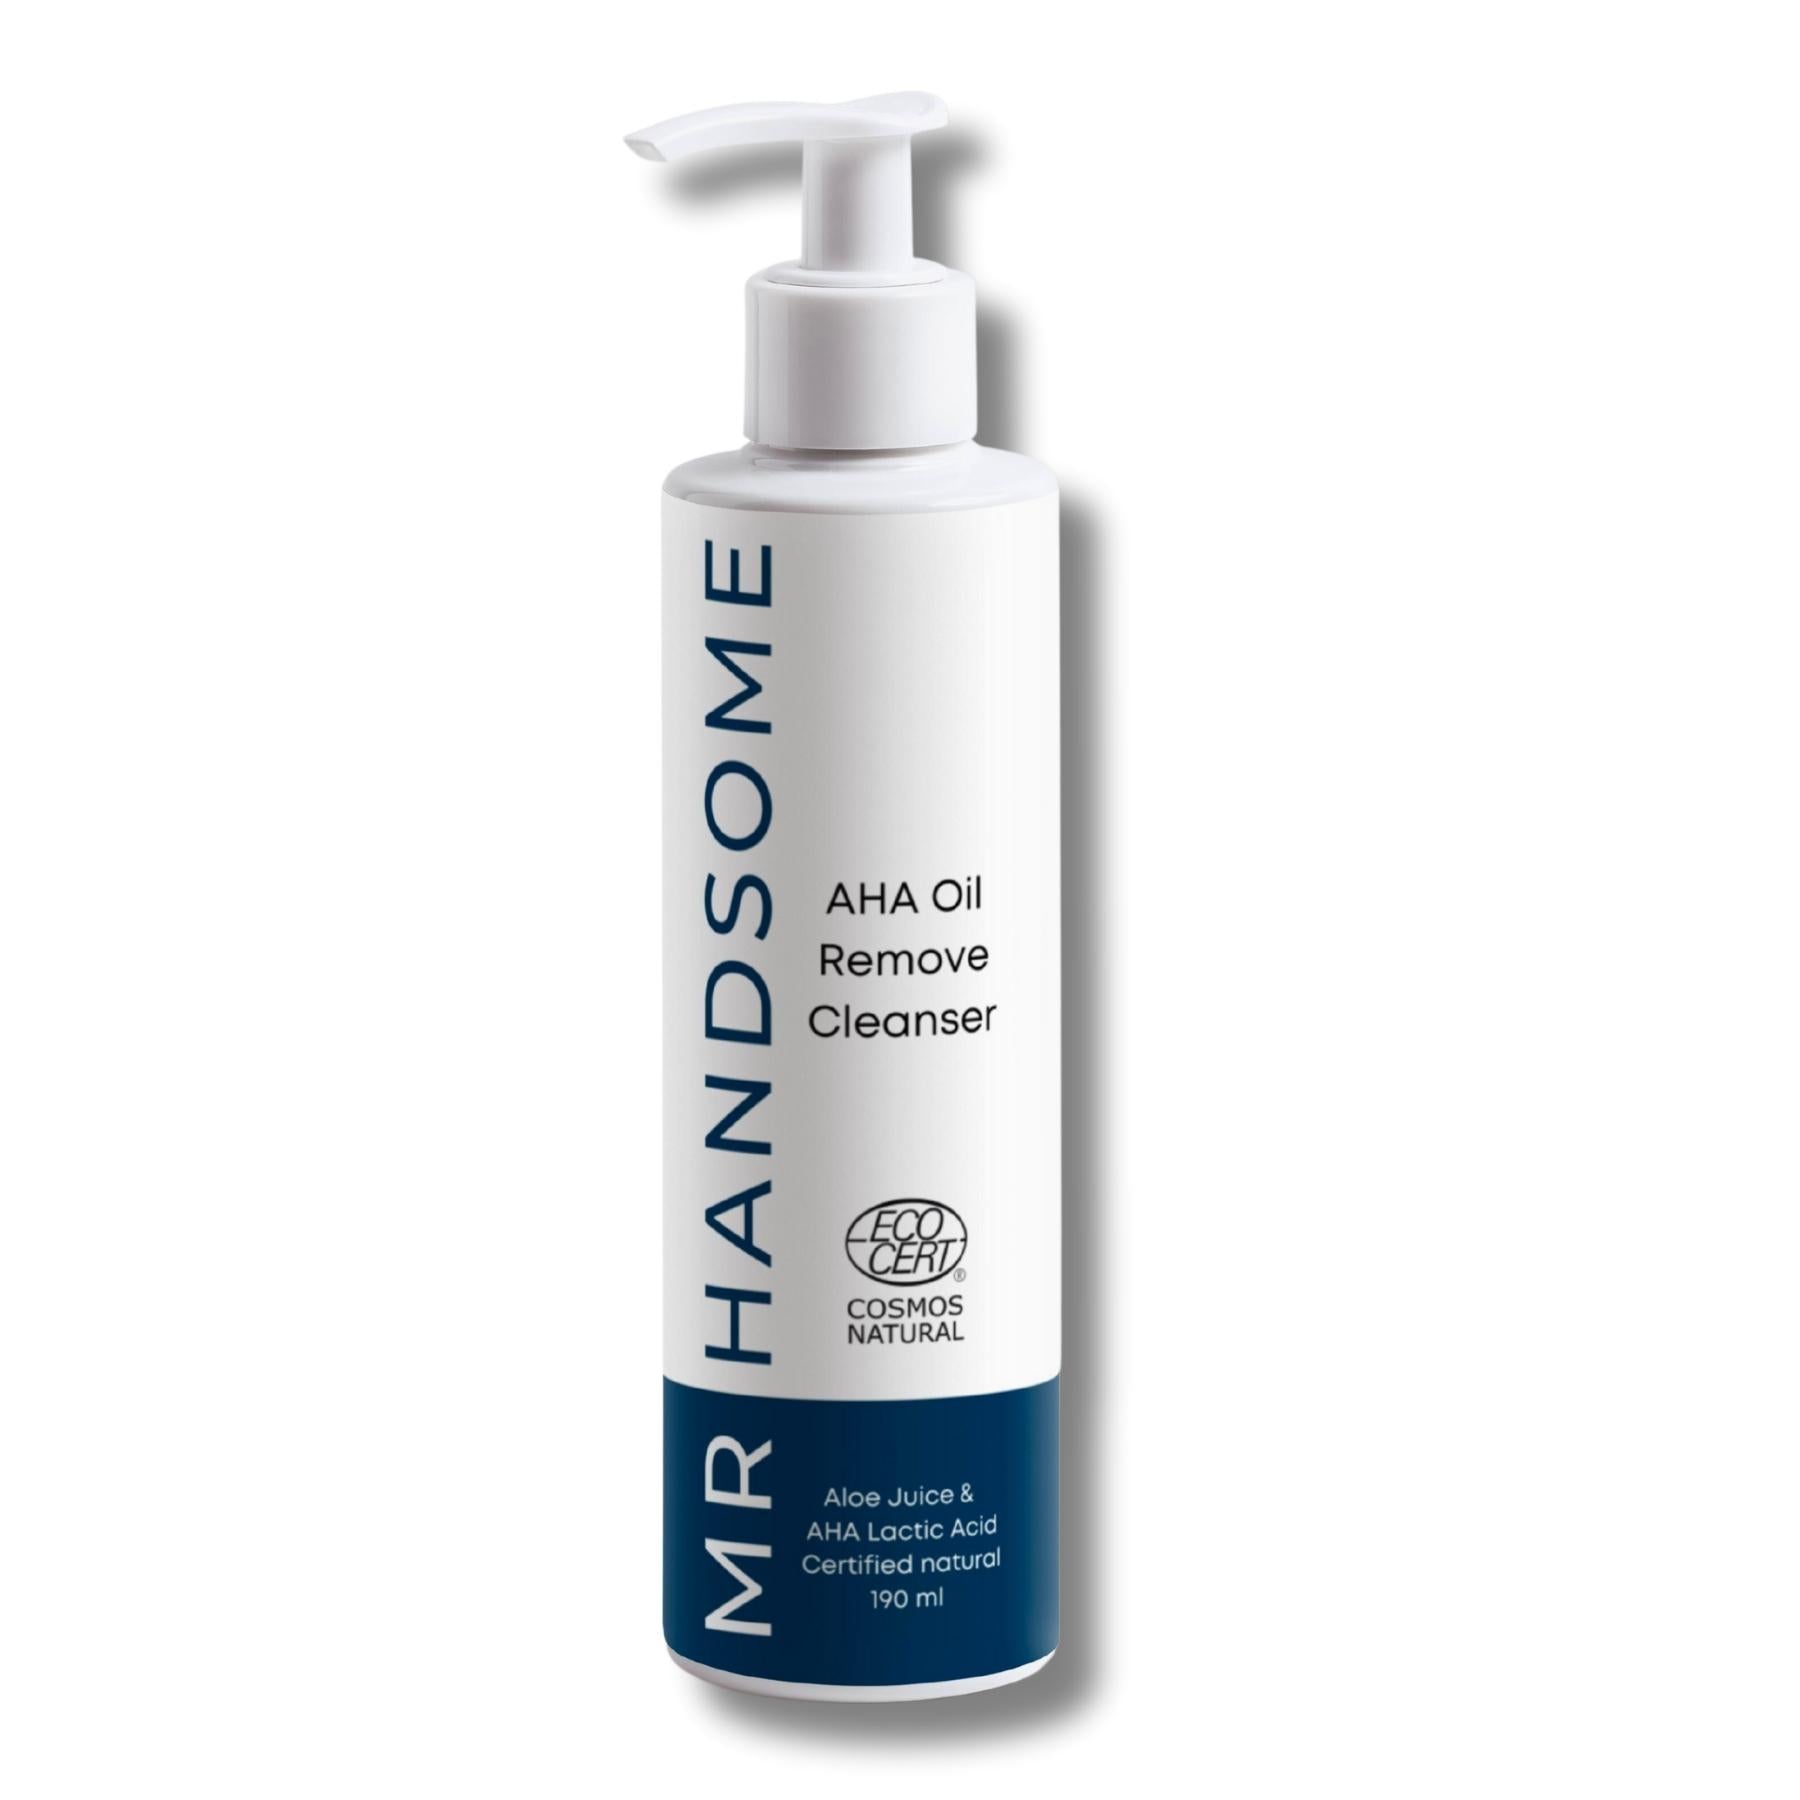 AHA Oil Remove Cleanser - MR HANDSOME